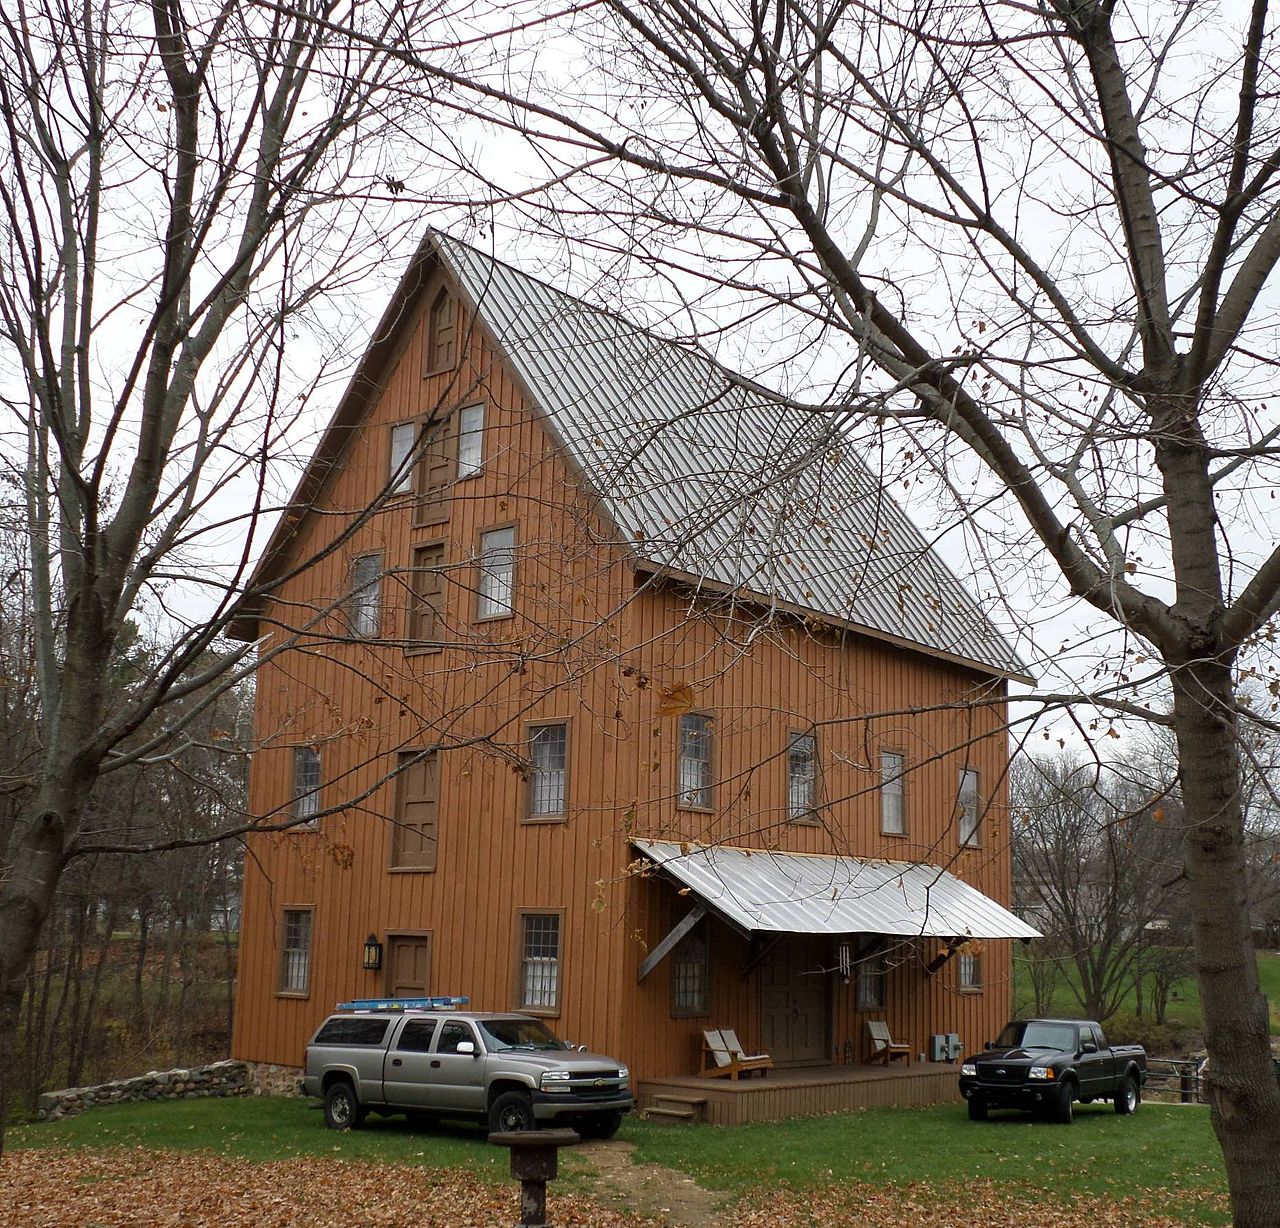 Bellevue Gothic Mill was built in 1854 and was restored by its current owners into a private home.